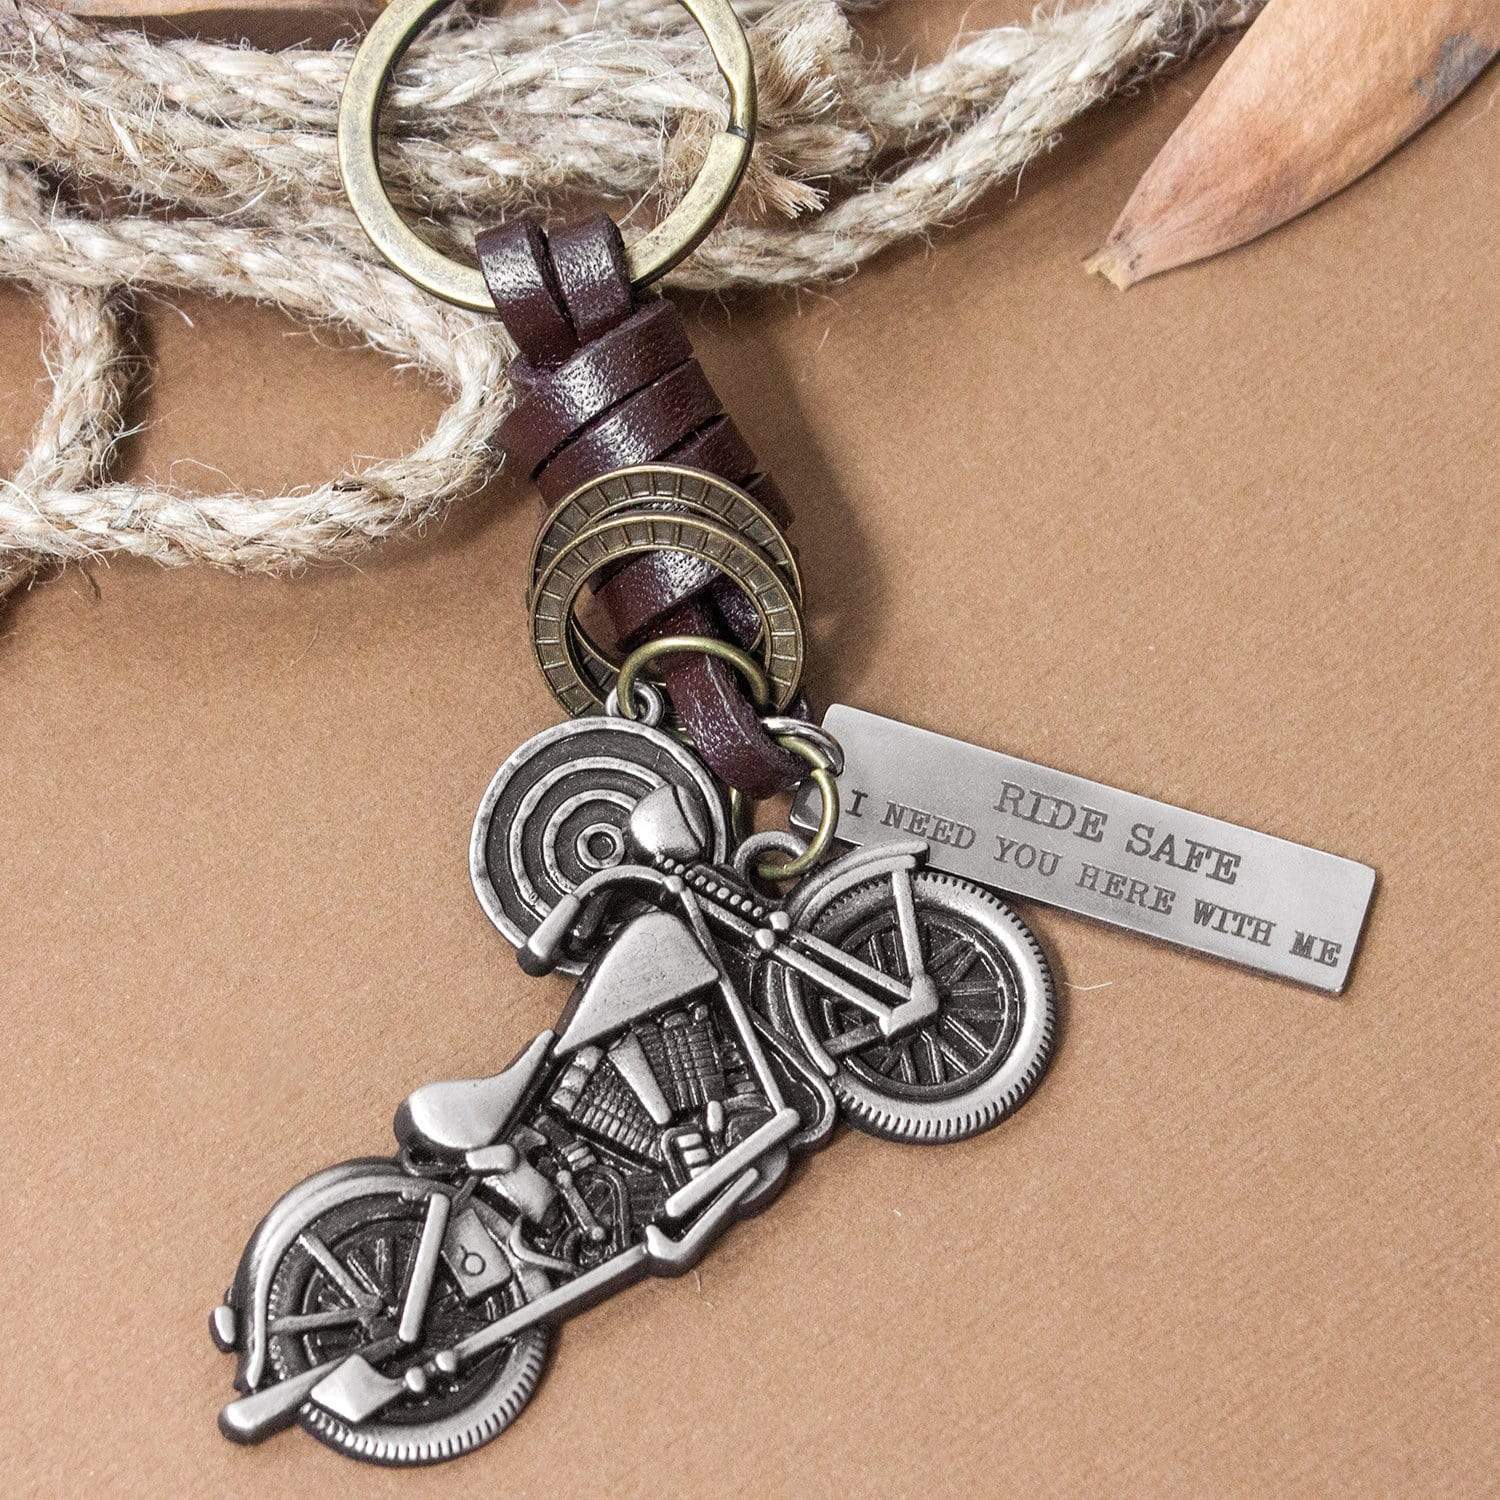 Motorcycle Keychain - To My Ole Lady - Ride Safe I Need You Here With Me